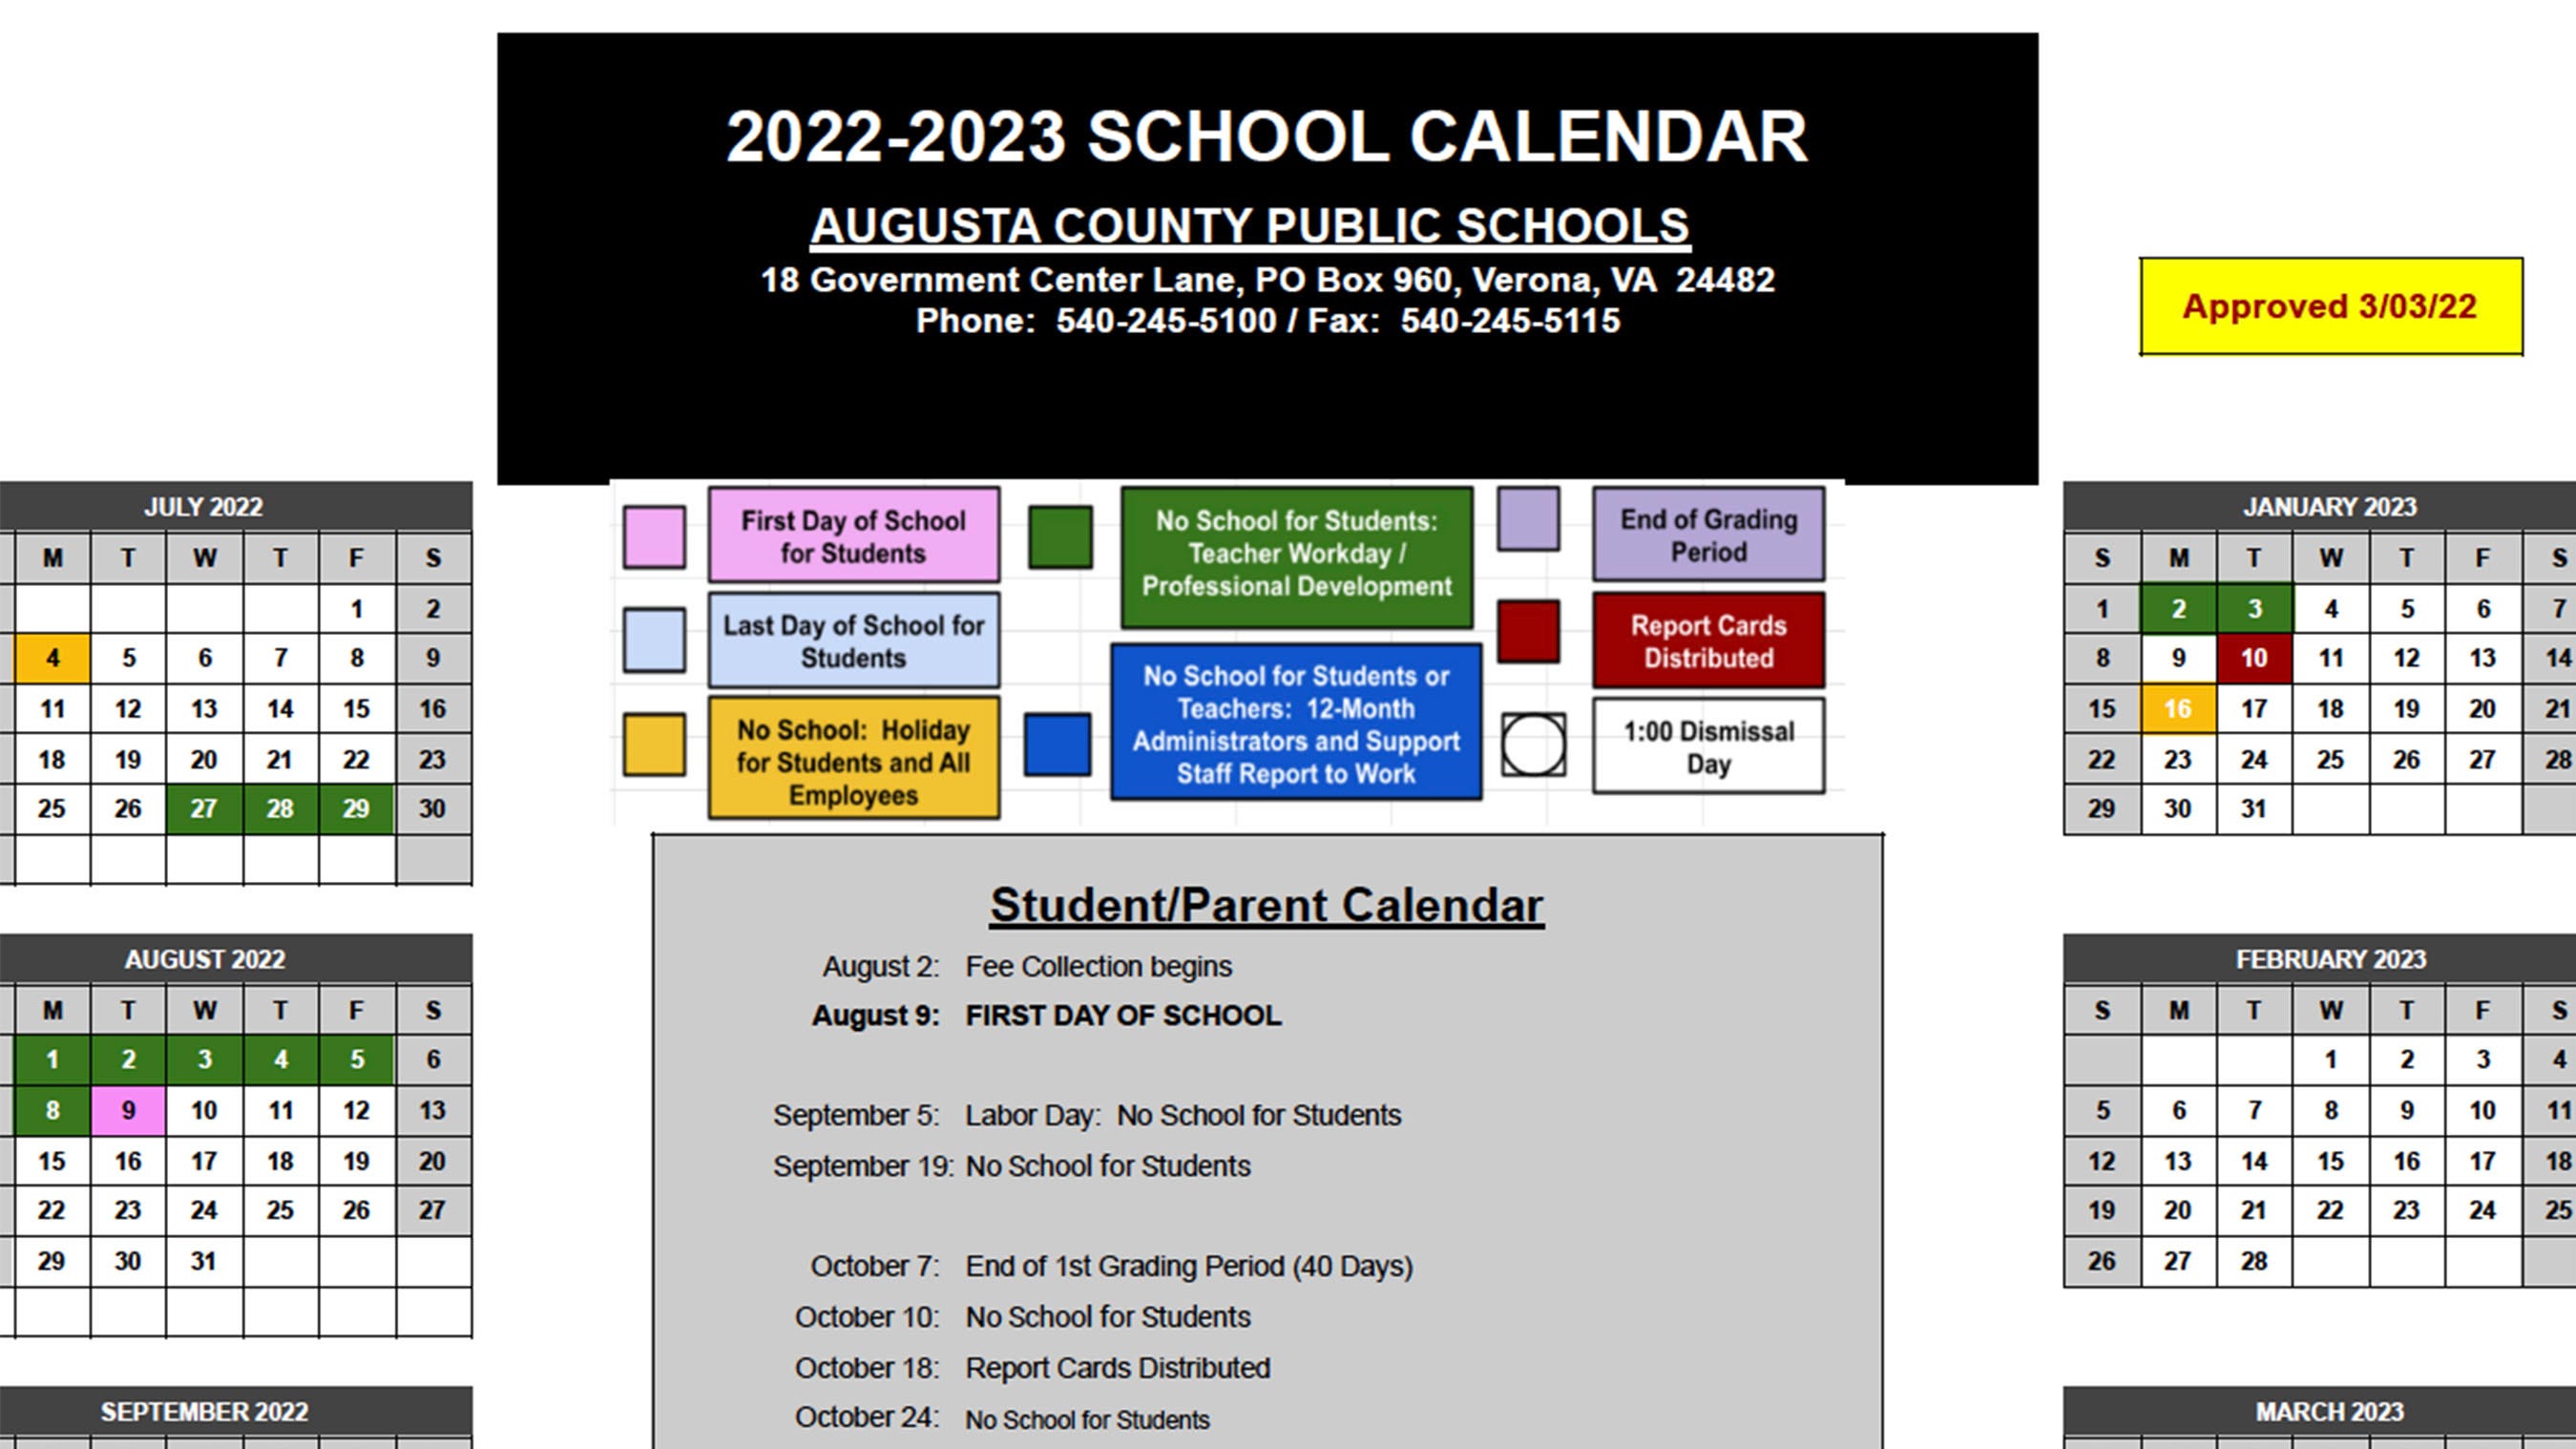 Augusta County approves school calendar for 2022-2023 academic year